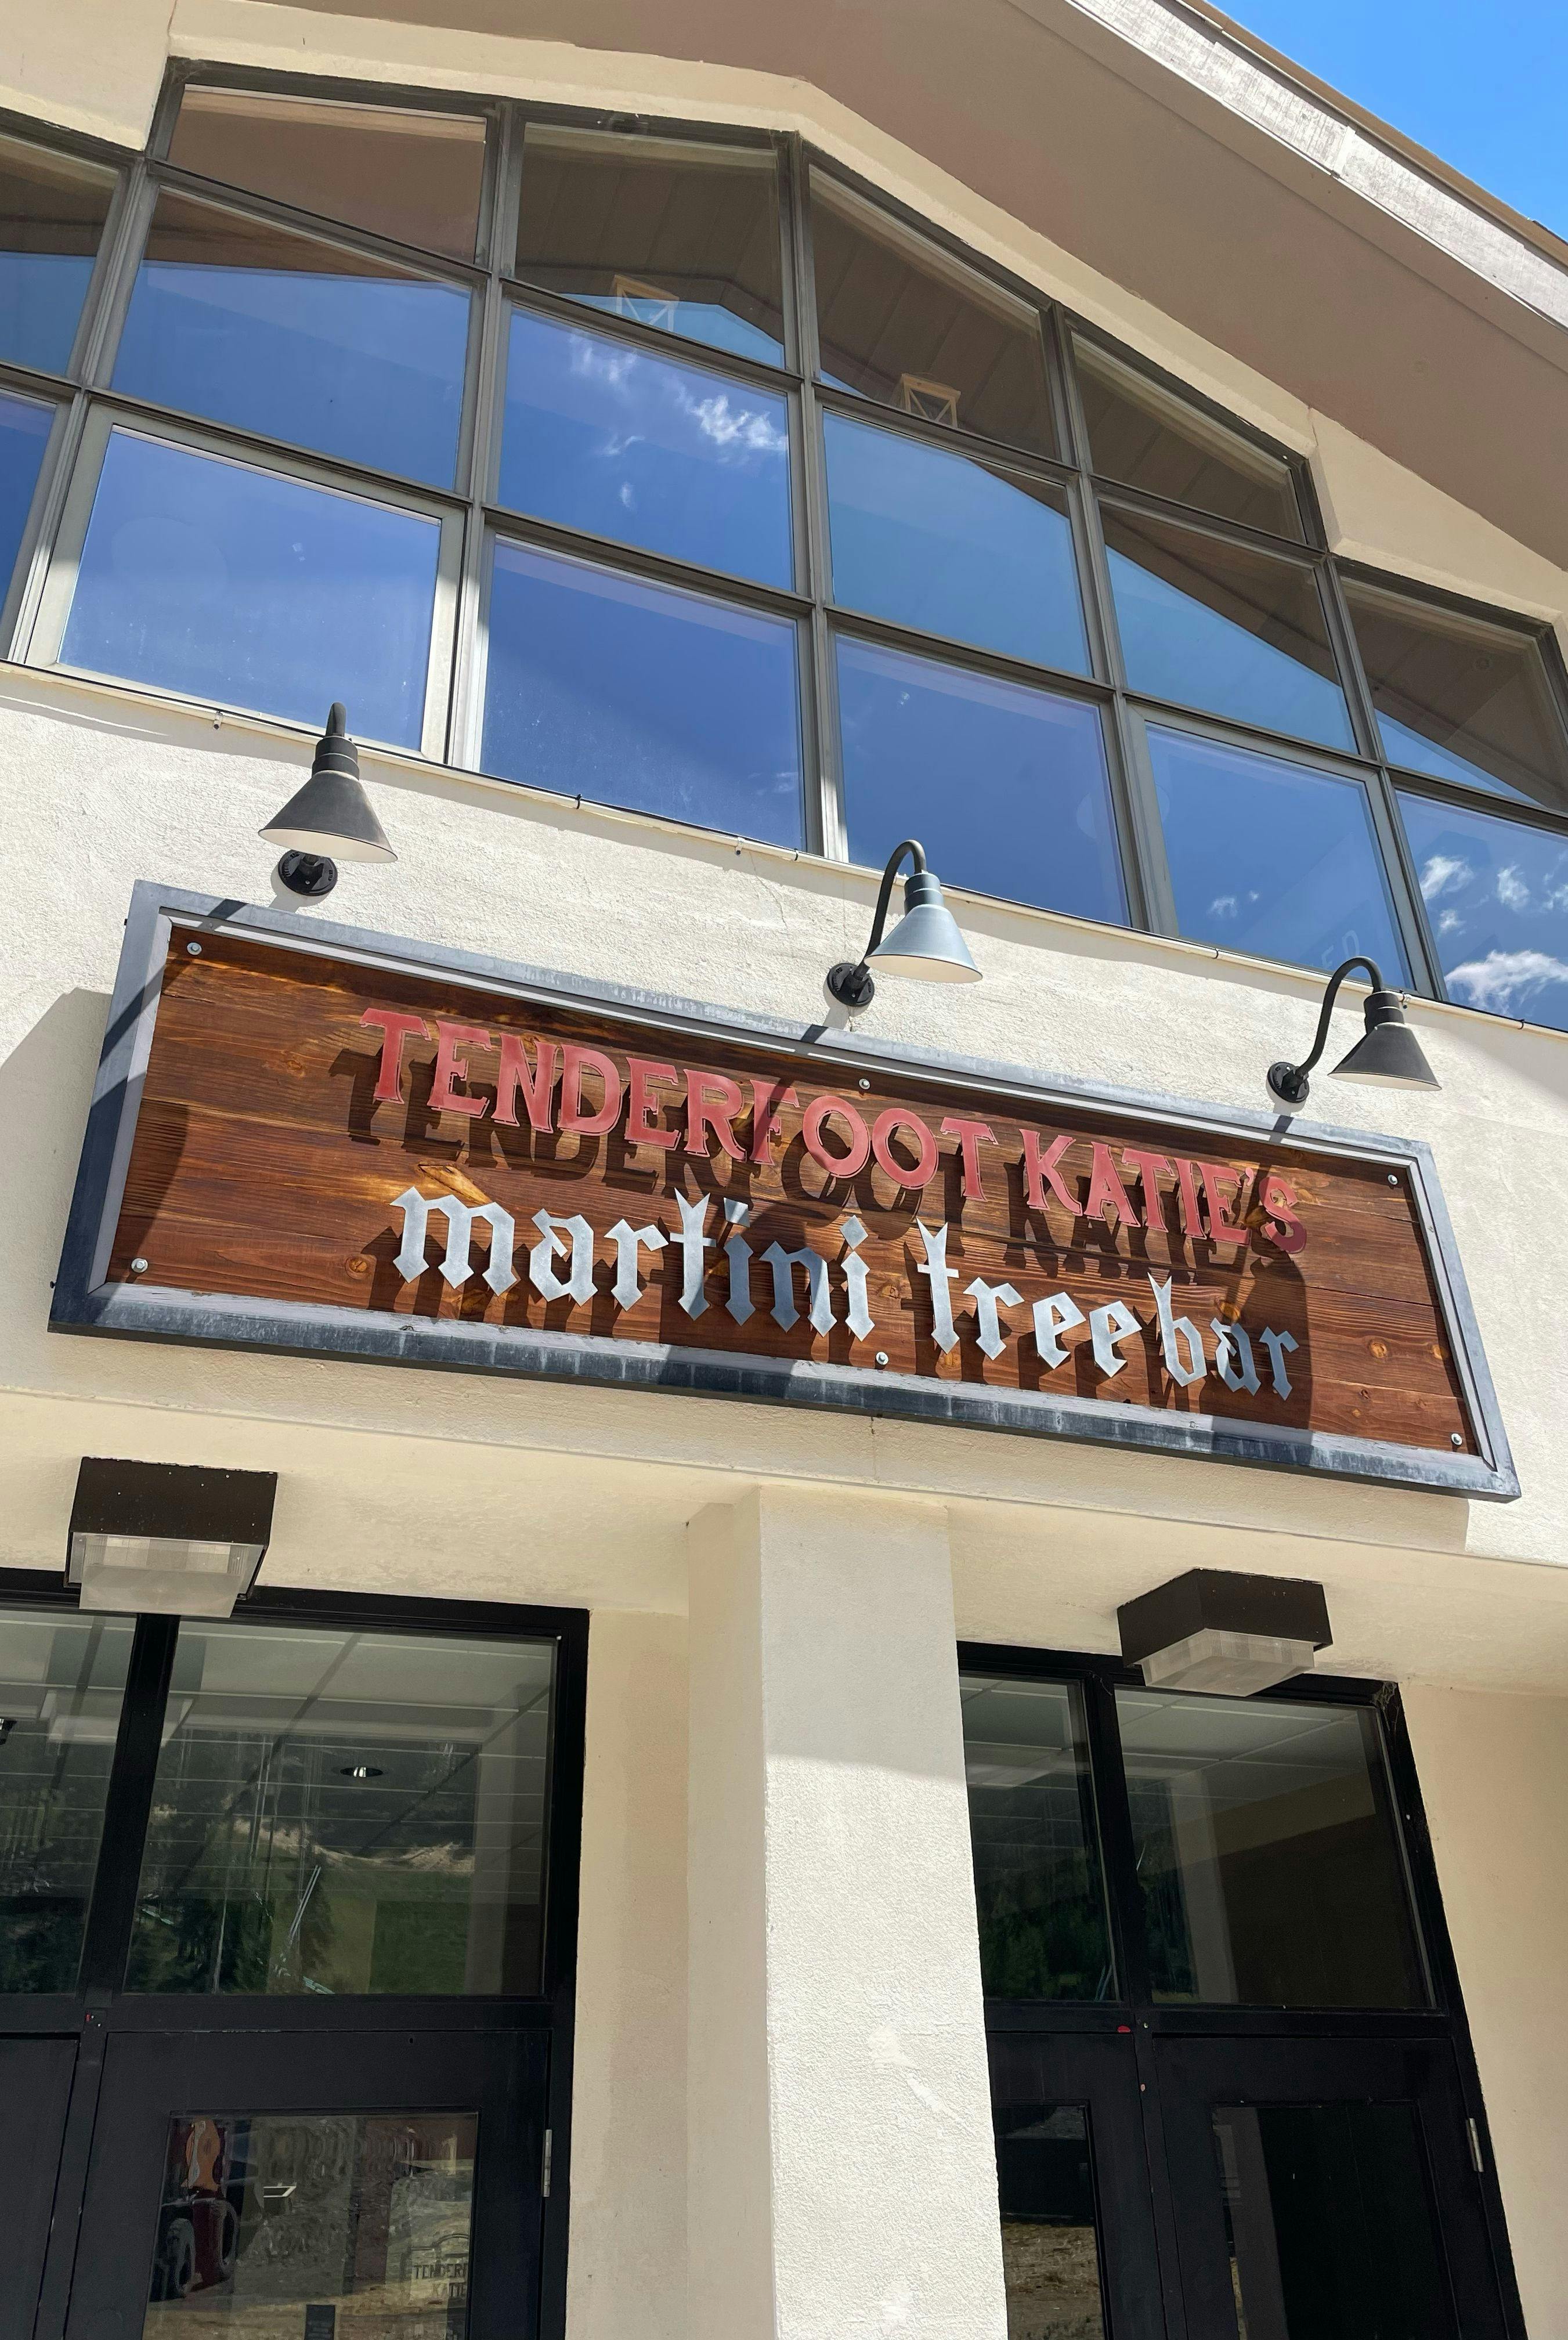 Sign above Tenderfoot Katie's and the Martini Tree Bar